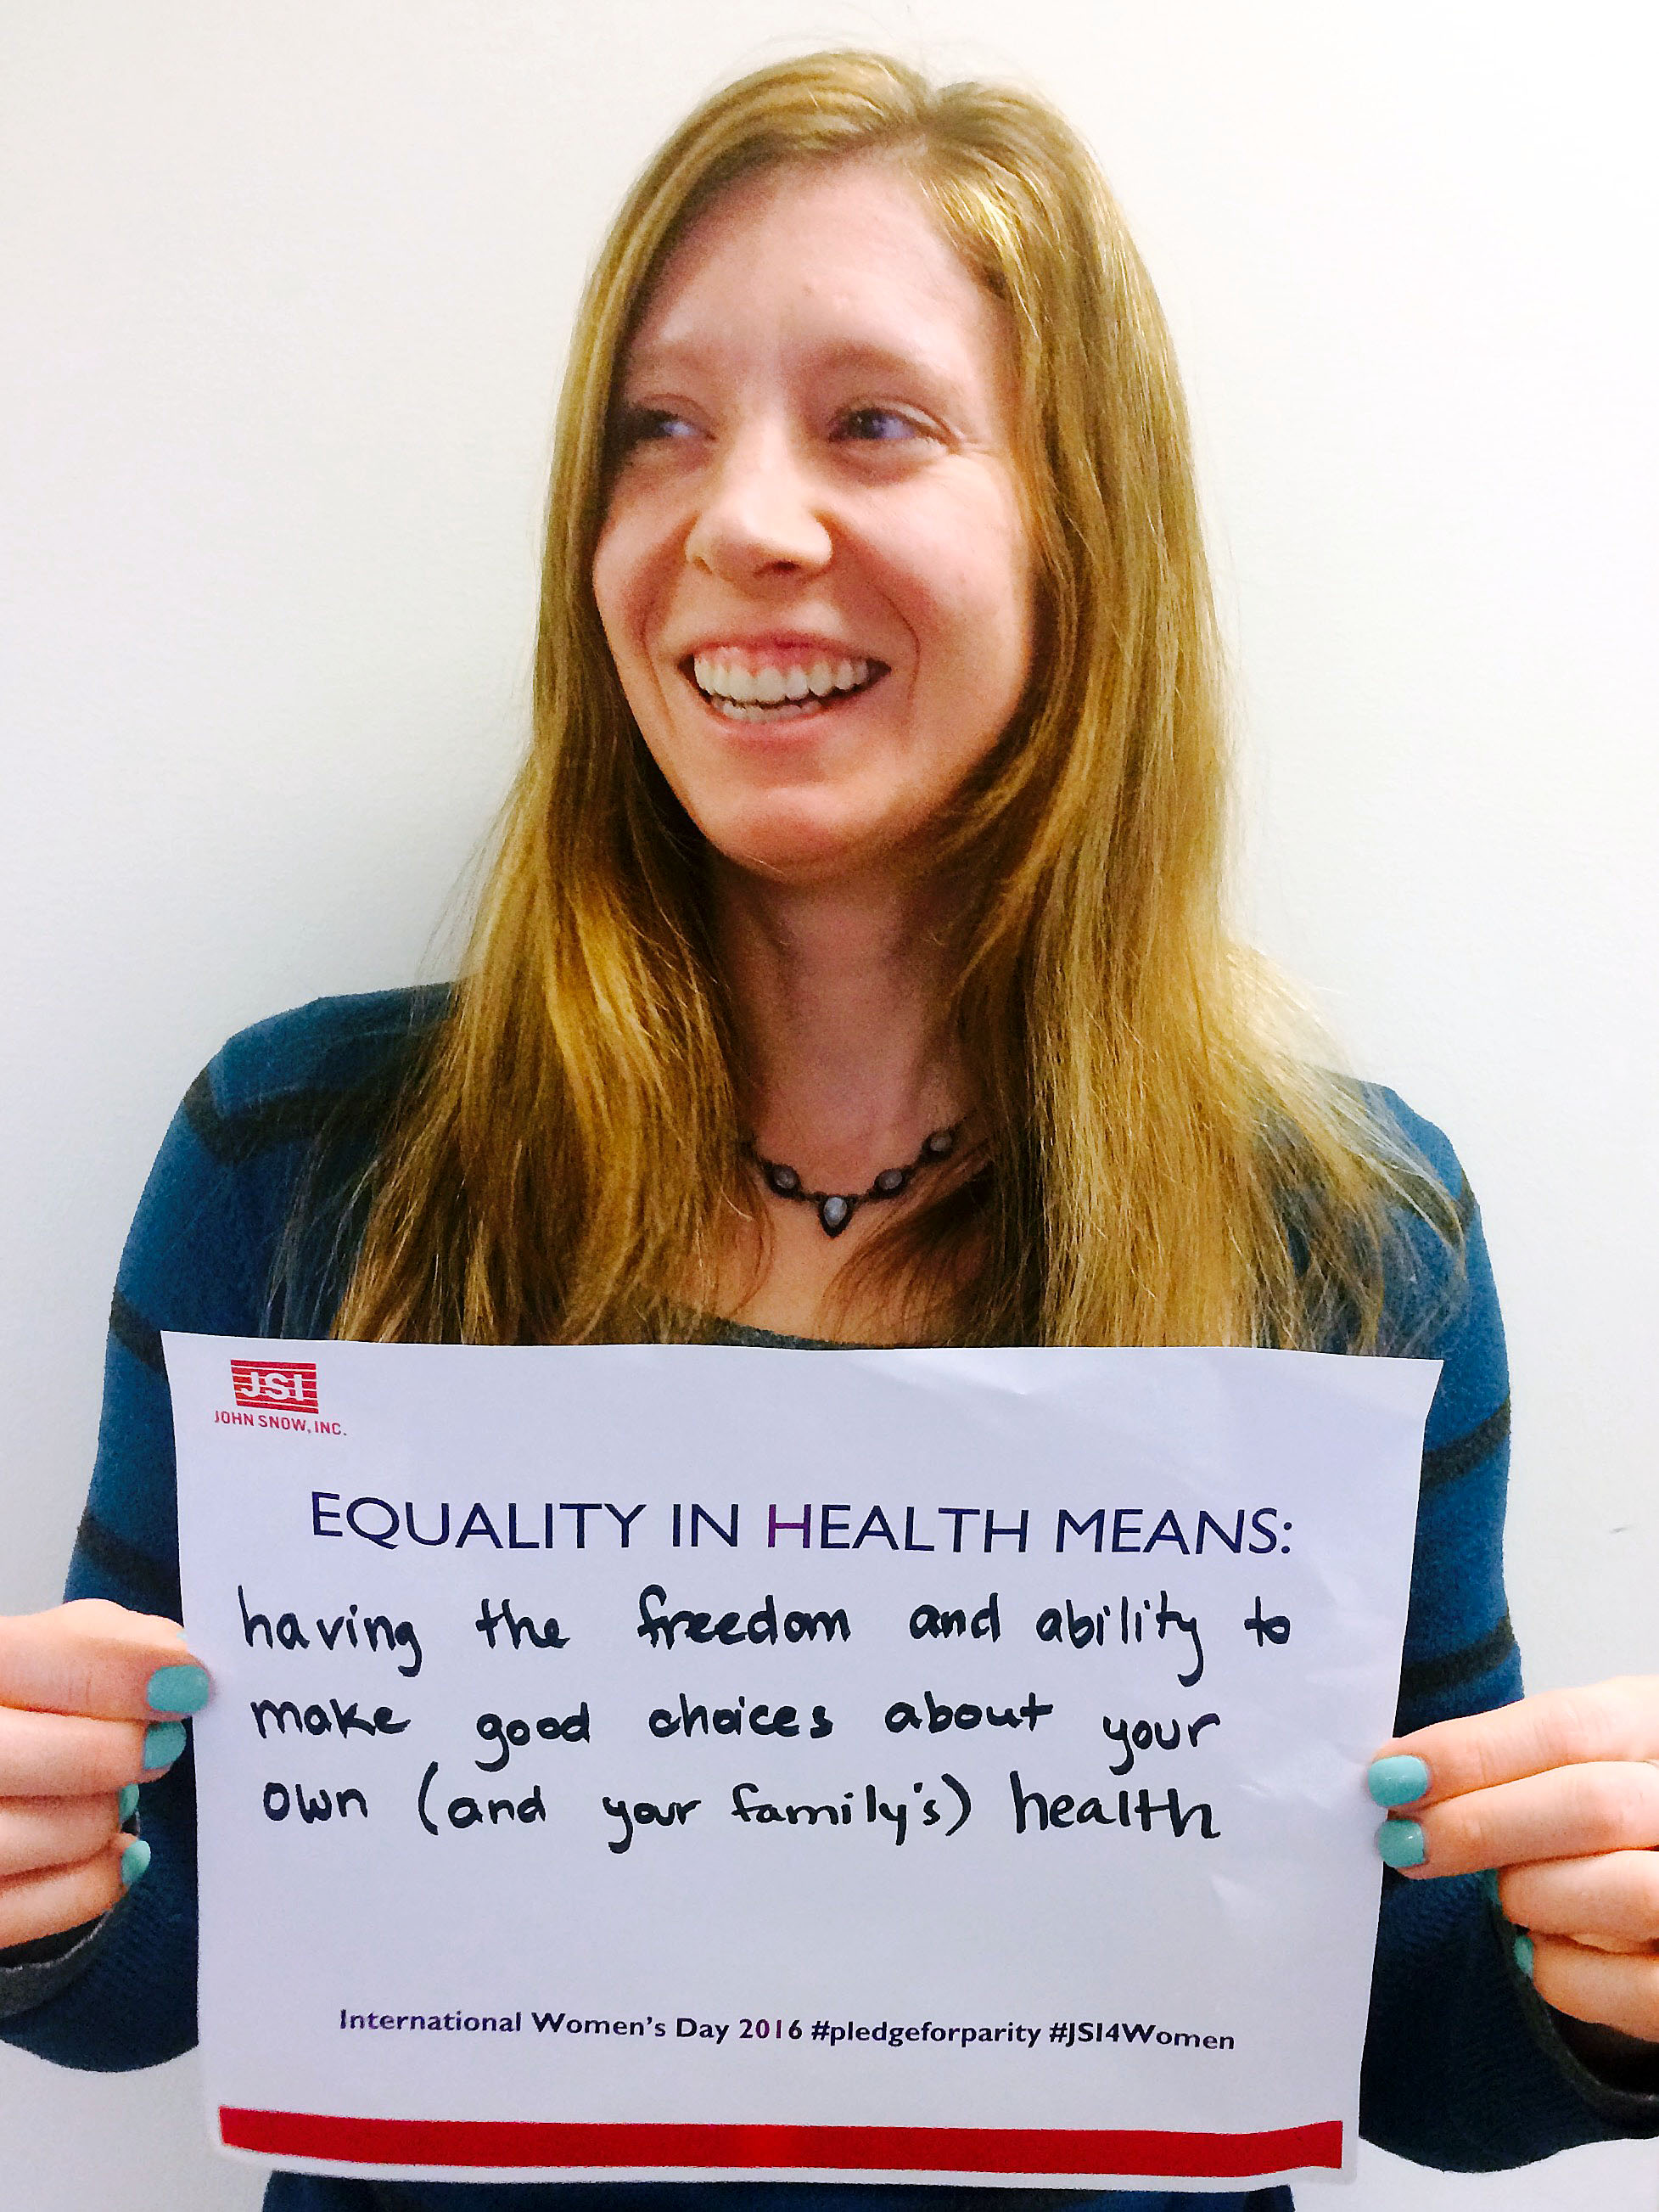 "Equality in health means having the freedom and ability to make good choices about your own and your family's health"